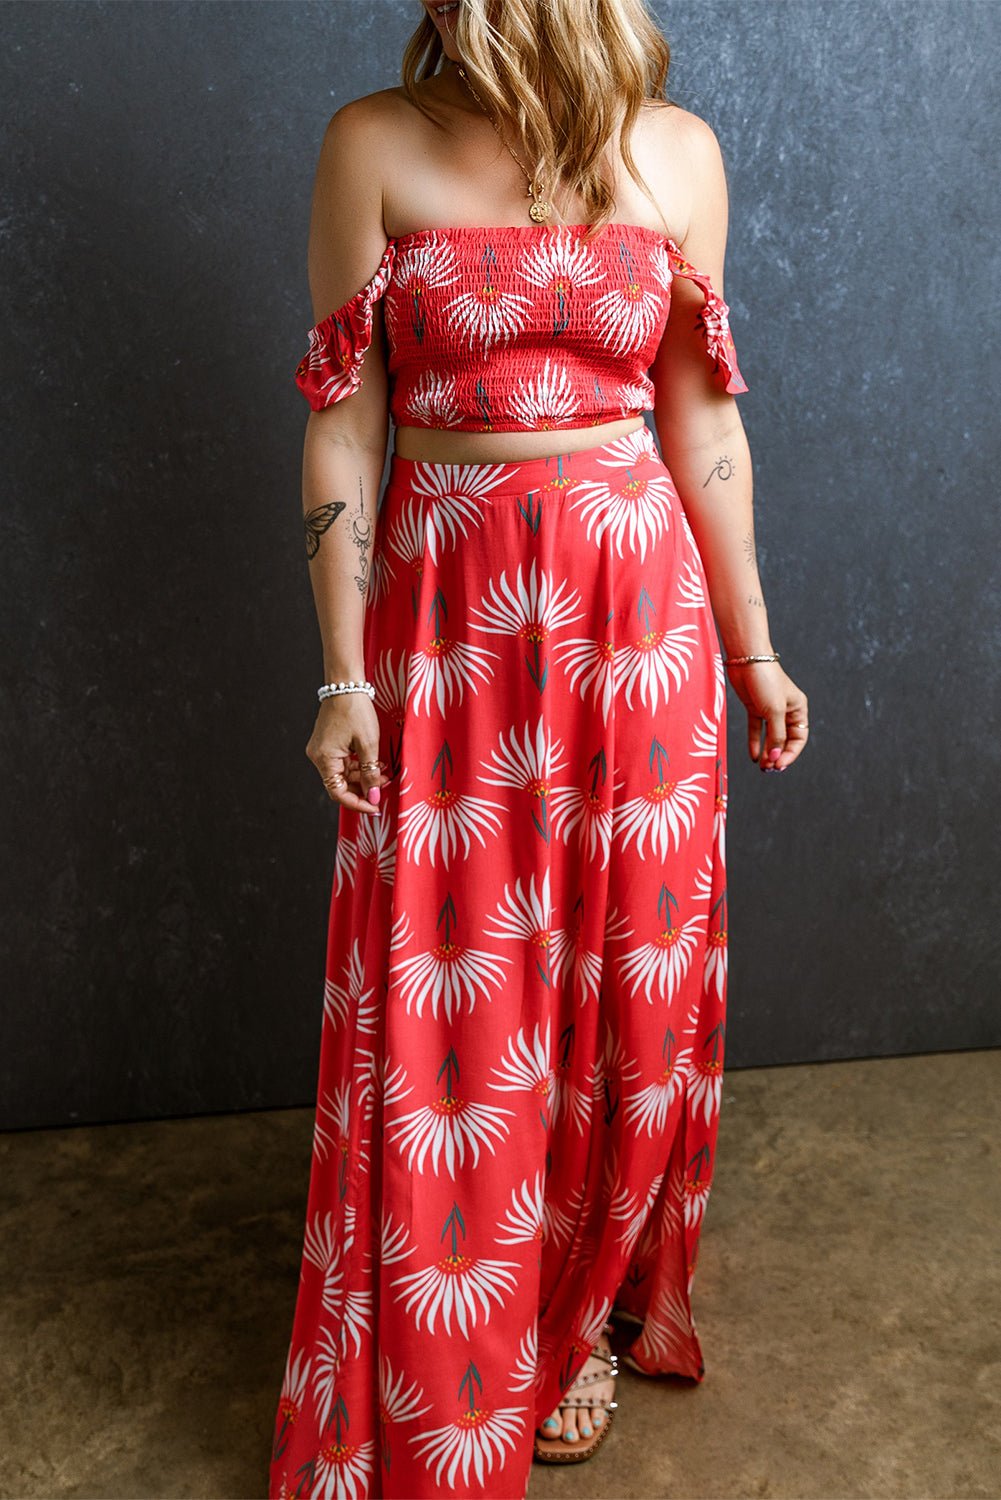 The image is showcasing a Bohemian Floral Shirred Off Shoulder Crop Top and Slit Maxi Skirt Set at Mommy & Lino's Closet